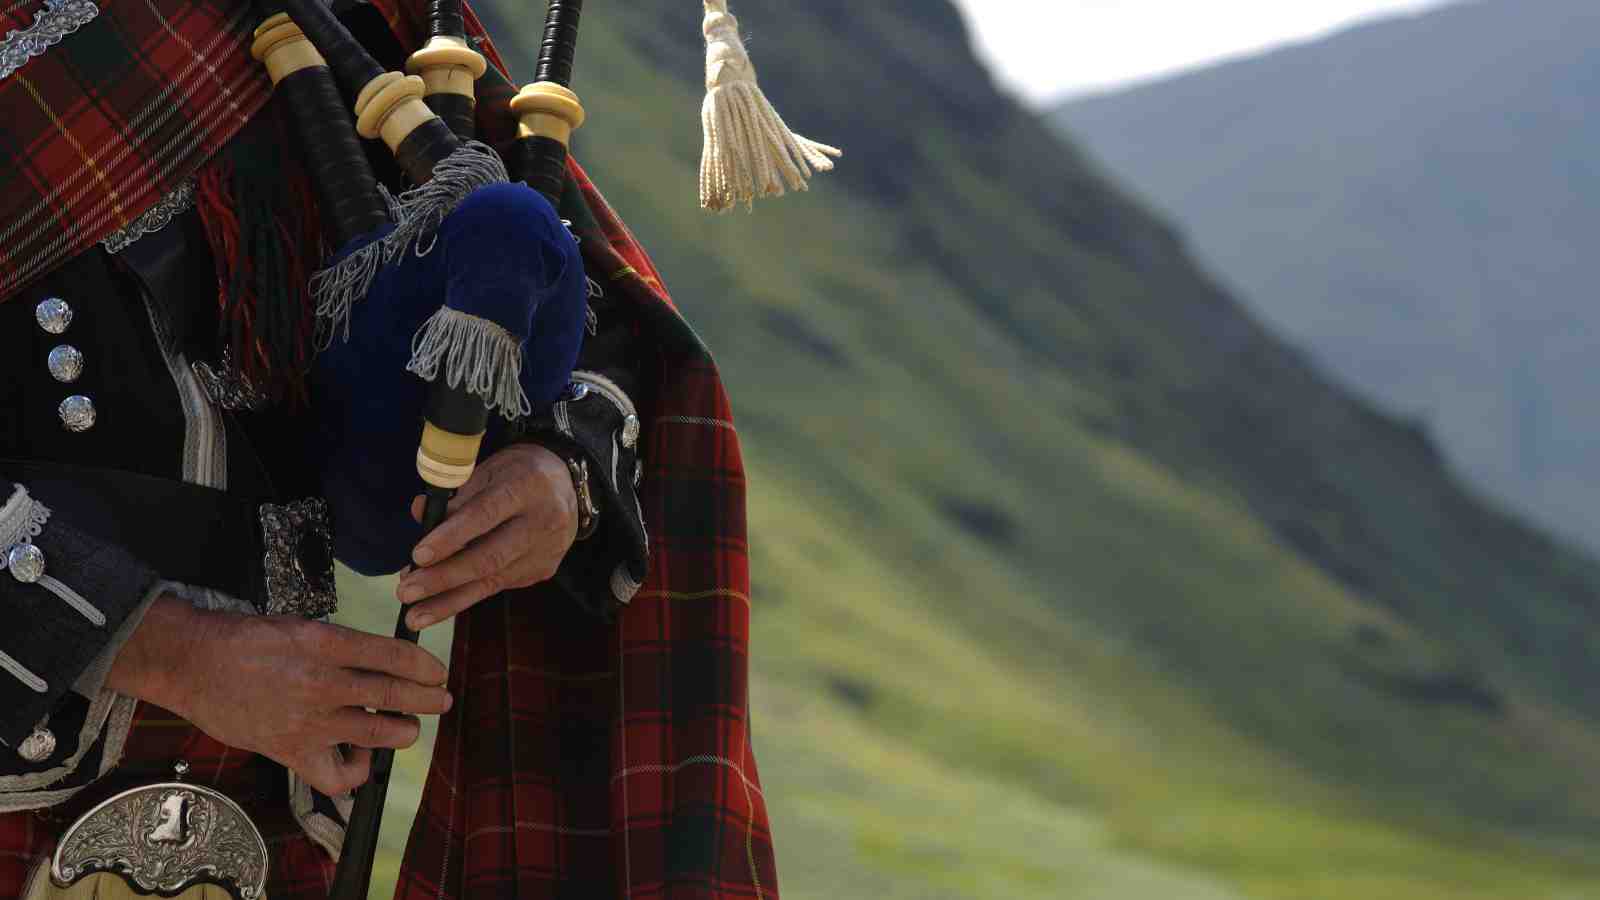 Scottish bagpiper with Scottish countryside in background